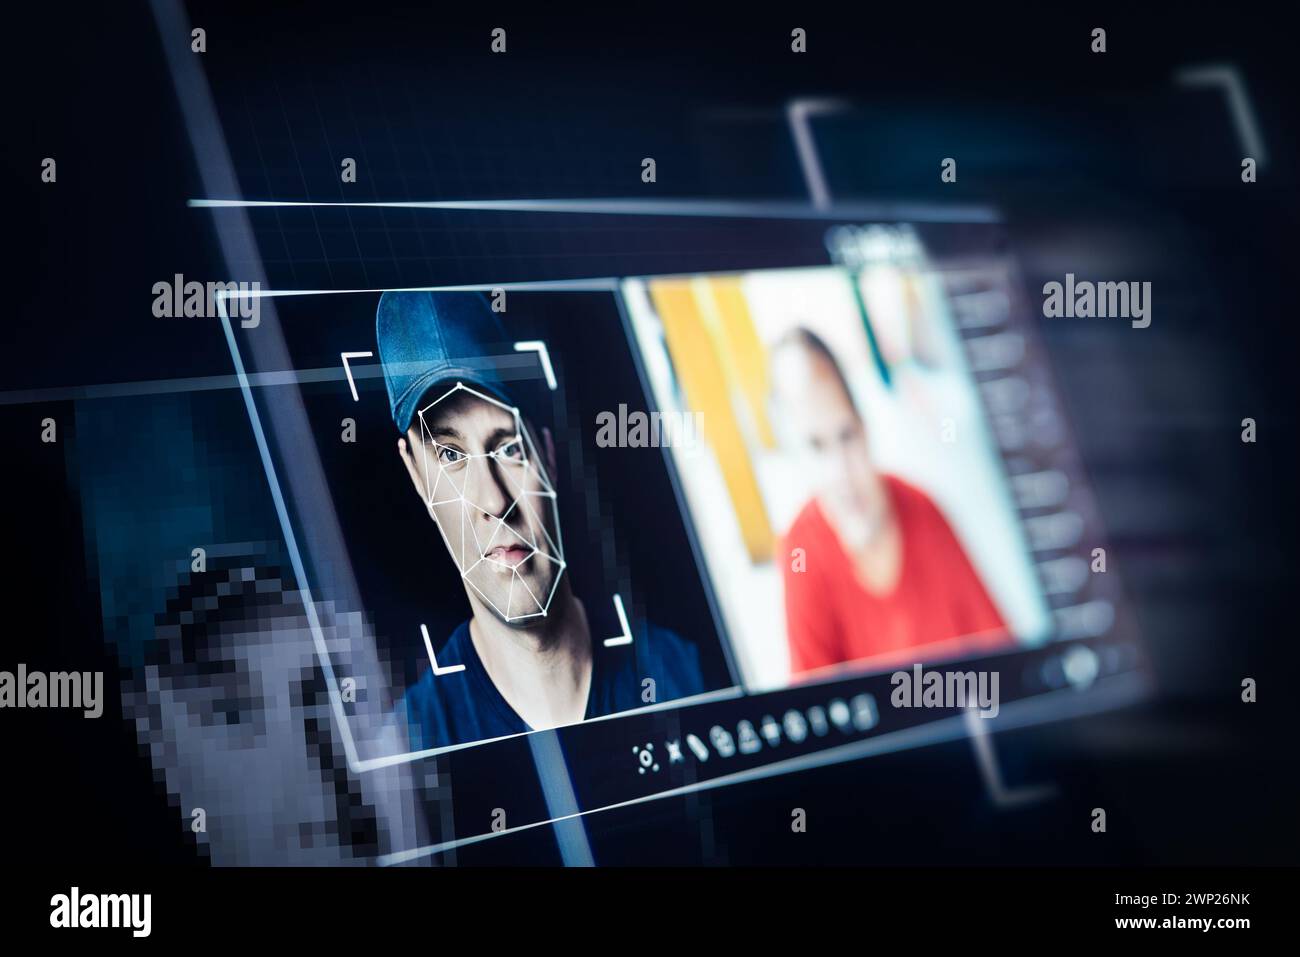 Deep fake. Deepfake and AI artificial intelligence video editing technology. Face of a person in editor. Machine learning concept. Fraud picture swap. Stock Photo